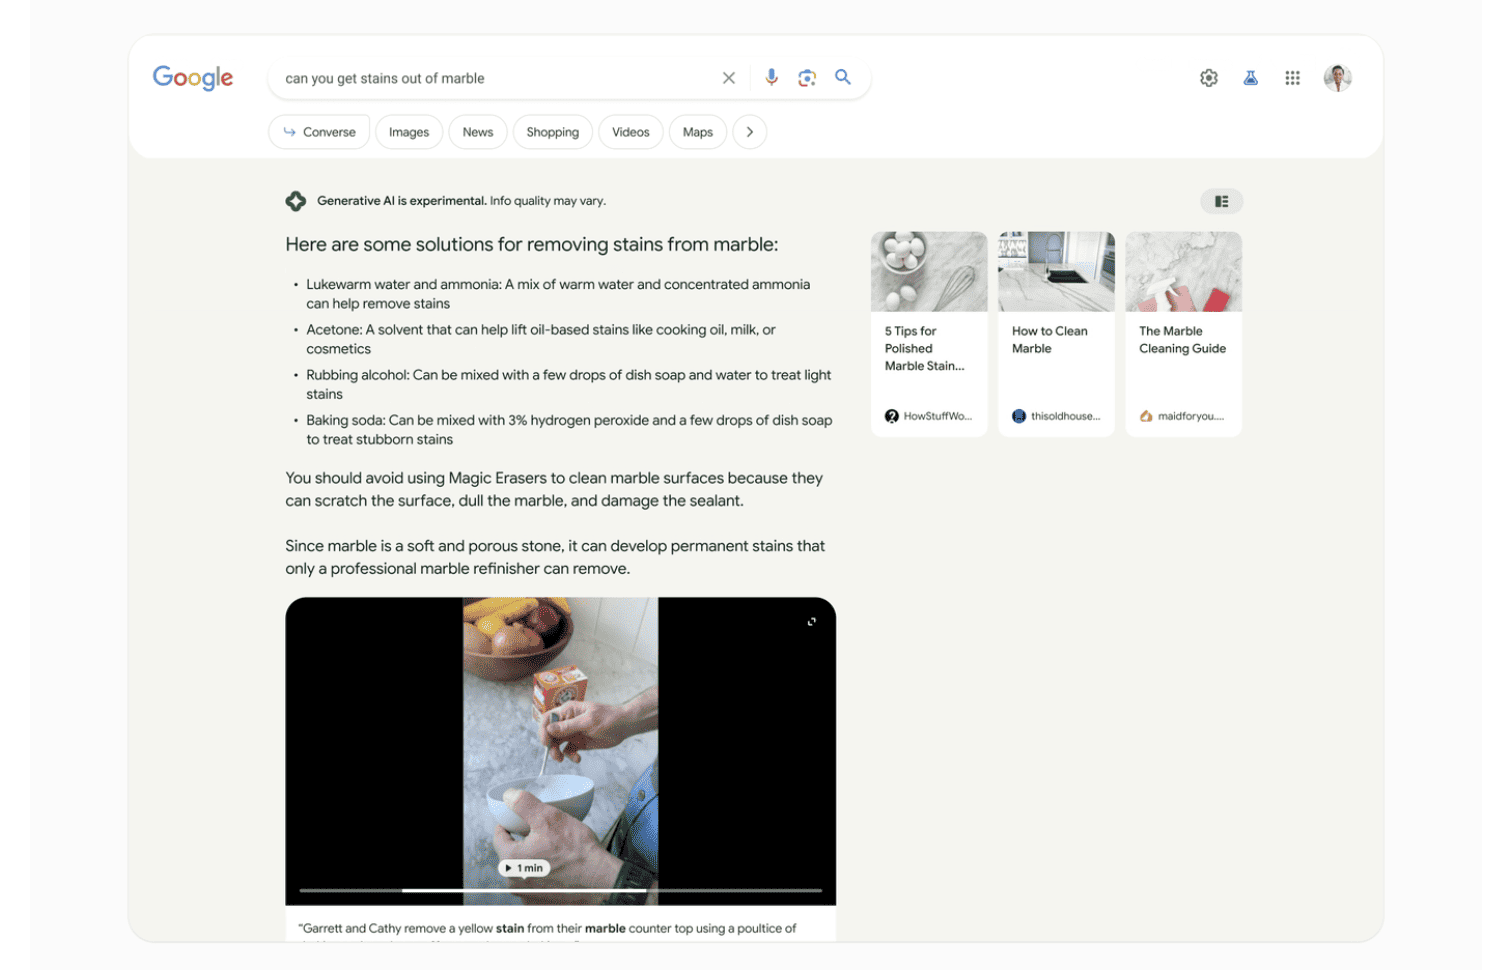 Screenshot taken from: https://blog.google/products/search/google-search-generative-ai-august-update/